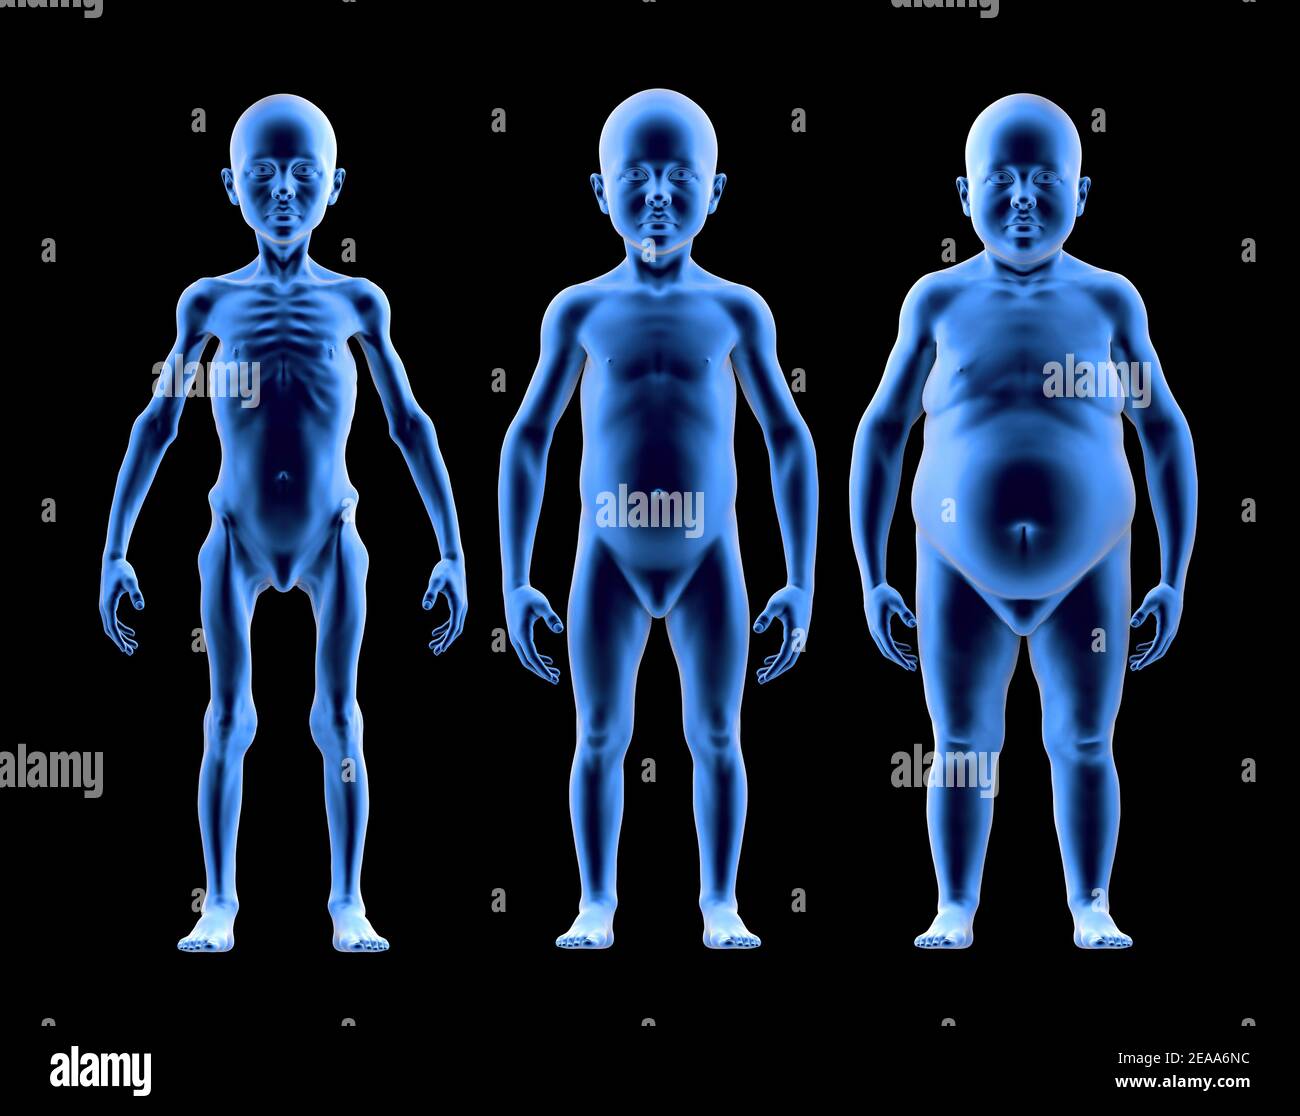 Undernourished child, with normal build and obese child in comparison. Problems of food shortage and obesity in children. 3d render Stock Photo